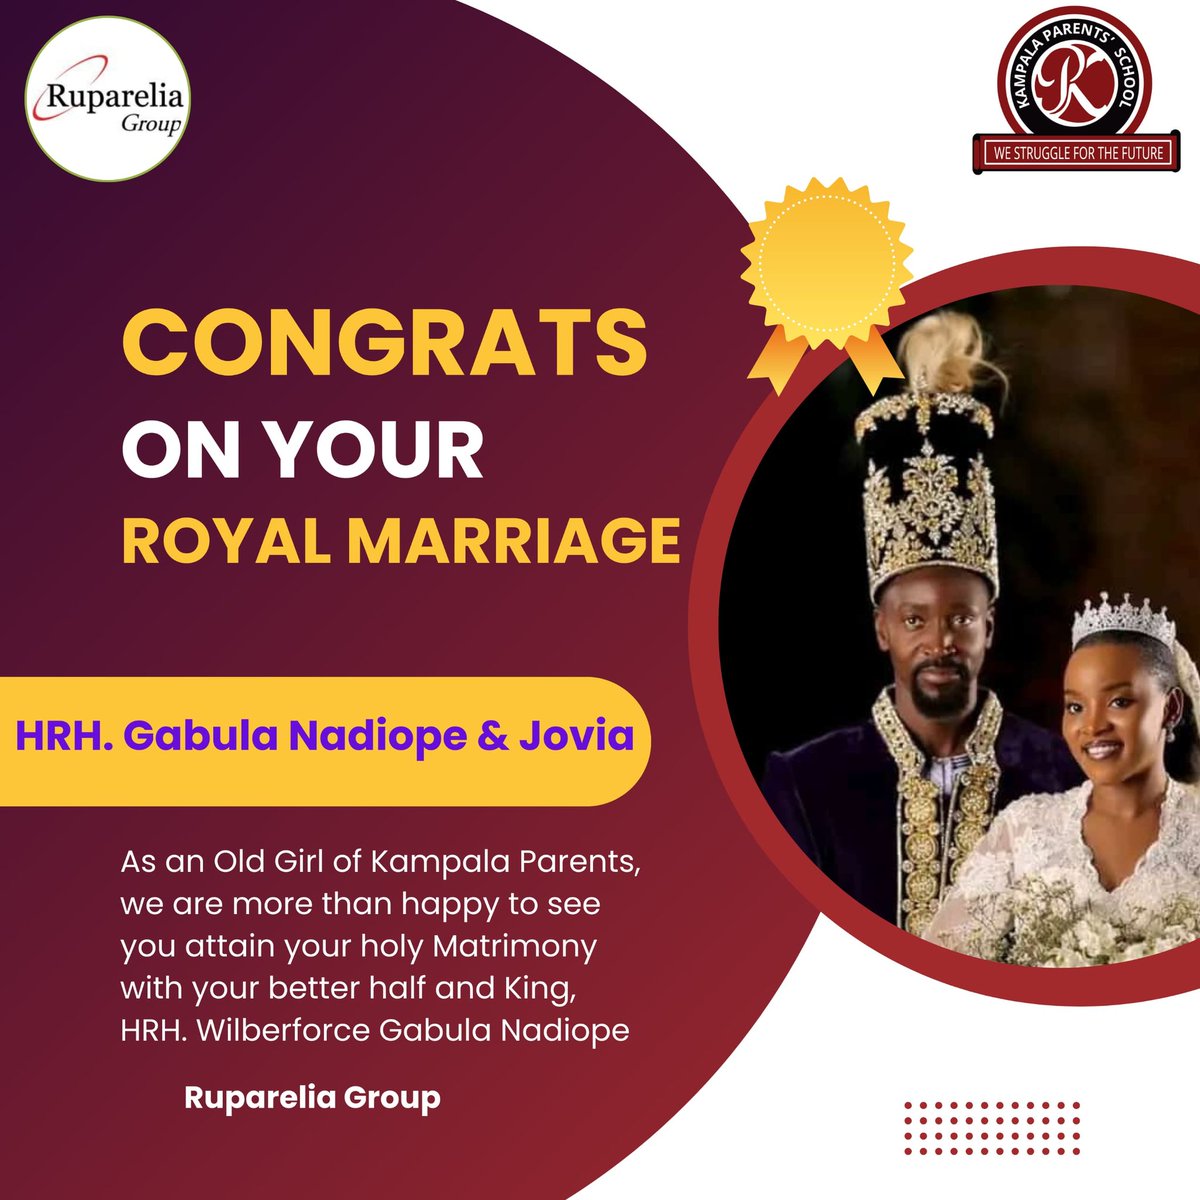 Congratulations to the @KingNadiopeIV ,His Majesty Nadiope William  as @kampalaparents under Ruparelia Group  we pray for blessings to your marriage, principle Kato Daphine she is very well proud of you , witnessed your academic from pre primary to your marriage in church today.